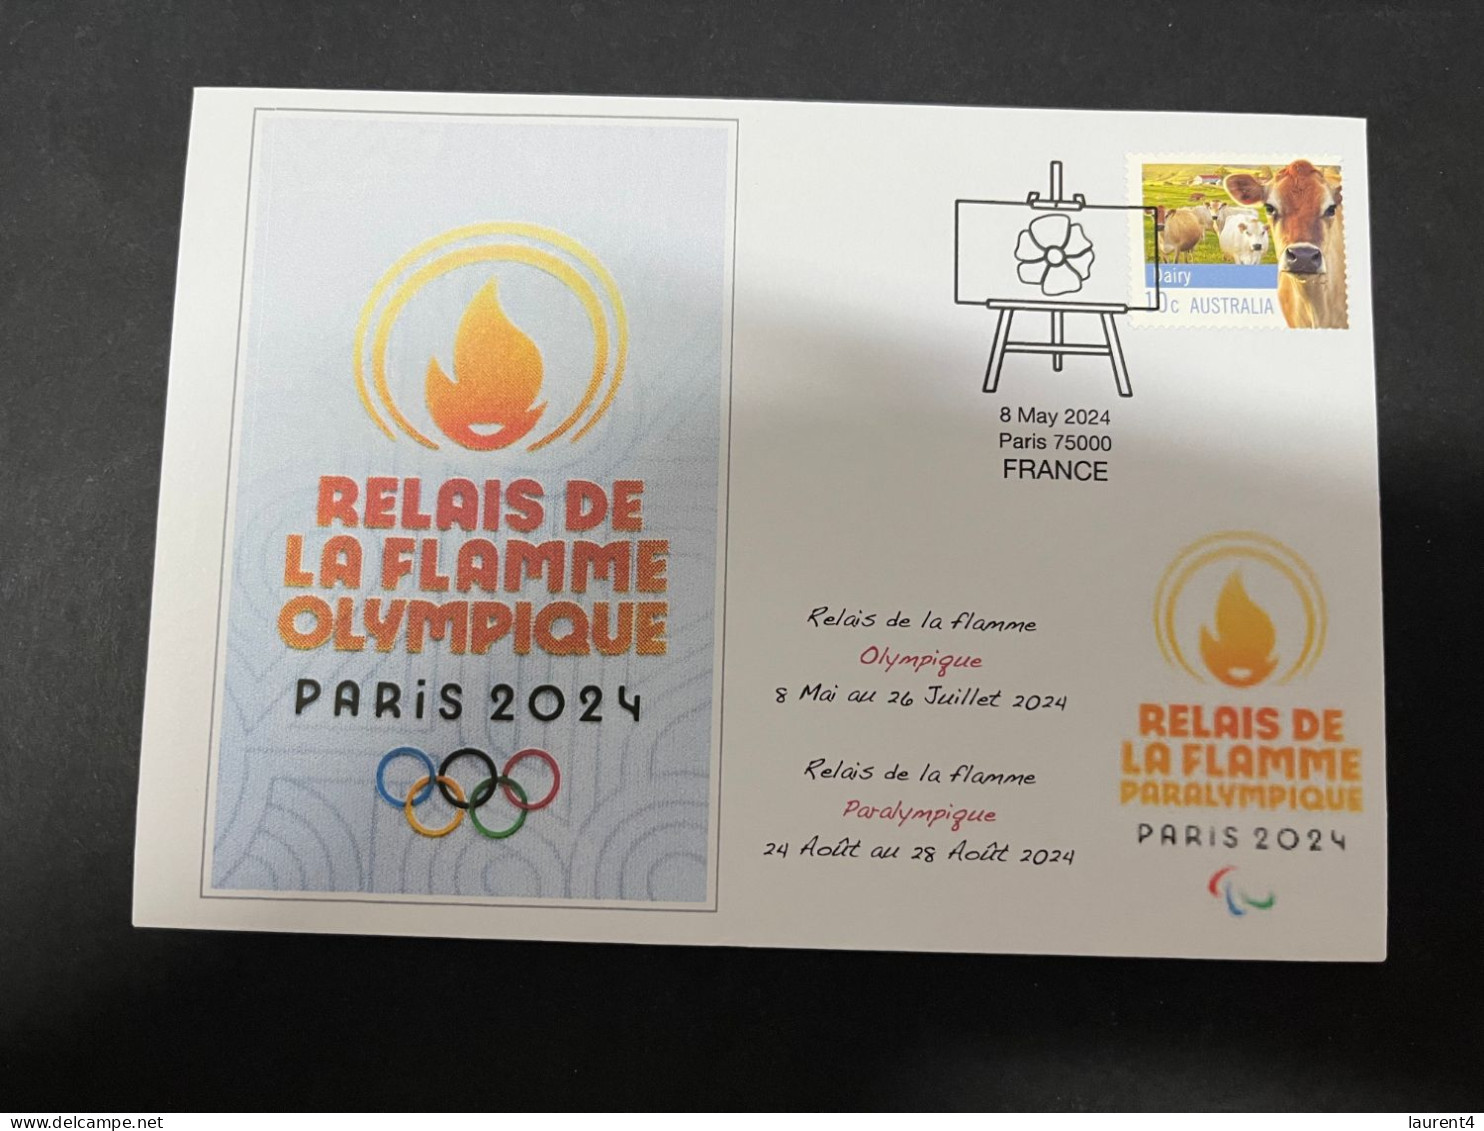 15-5-2024 (5 Z 12) Paris Olympic Games 2024 - Torch Relay In France (with OZ Stamp) - Summer 2024: Paris